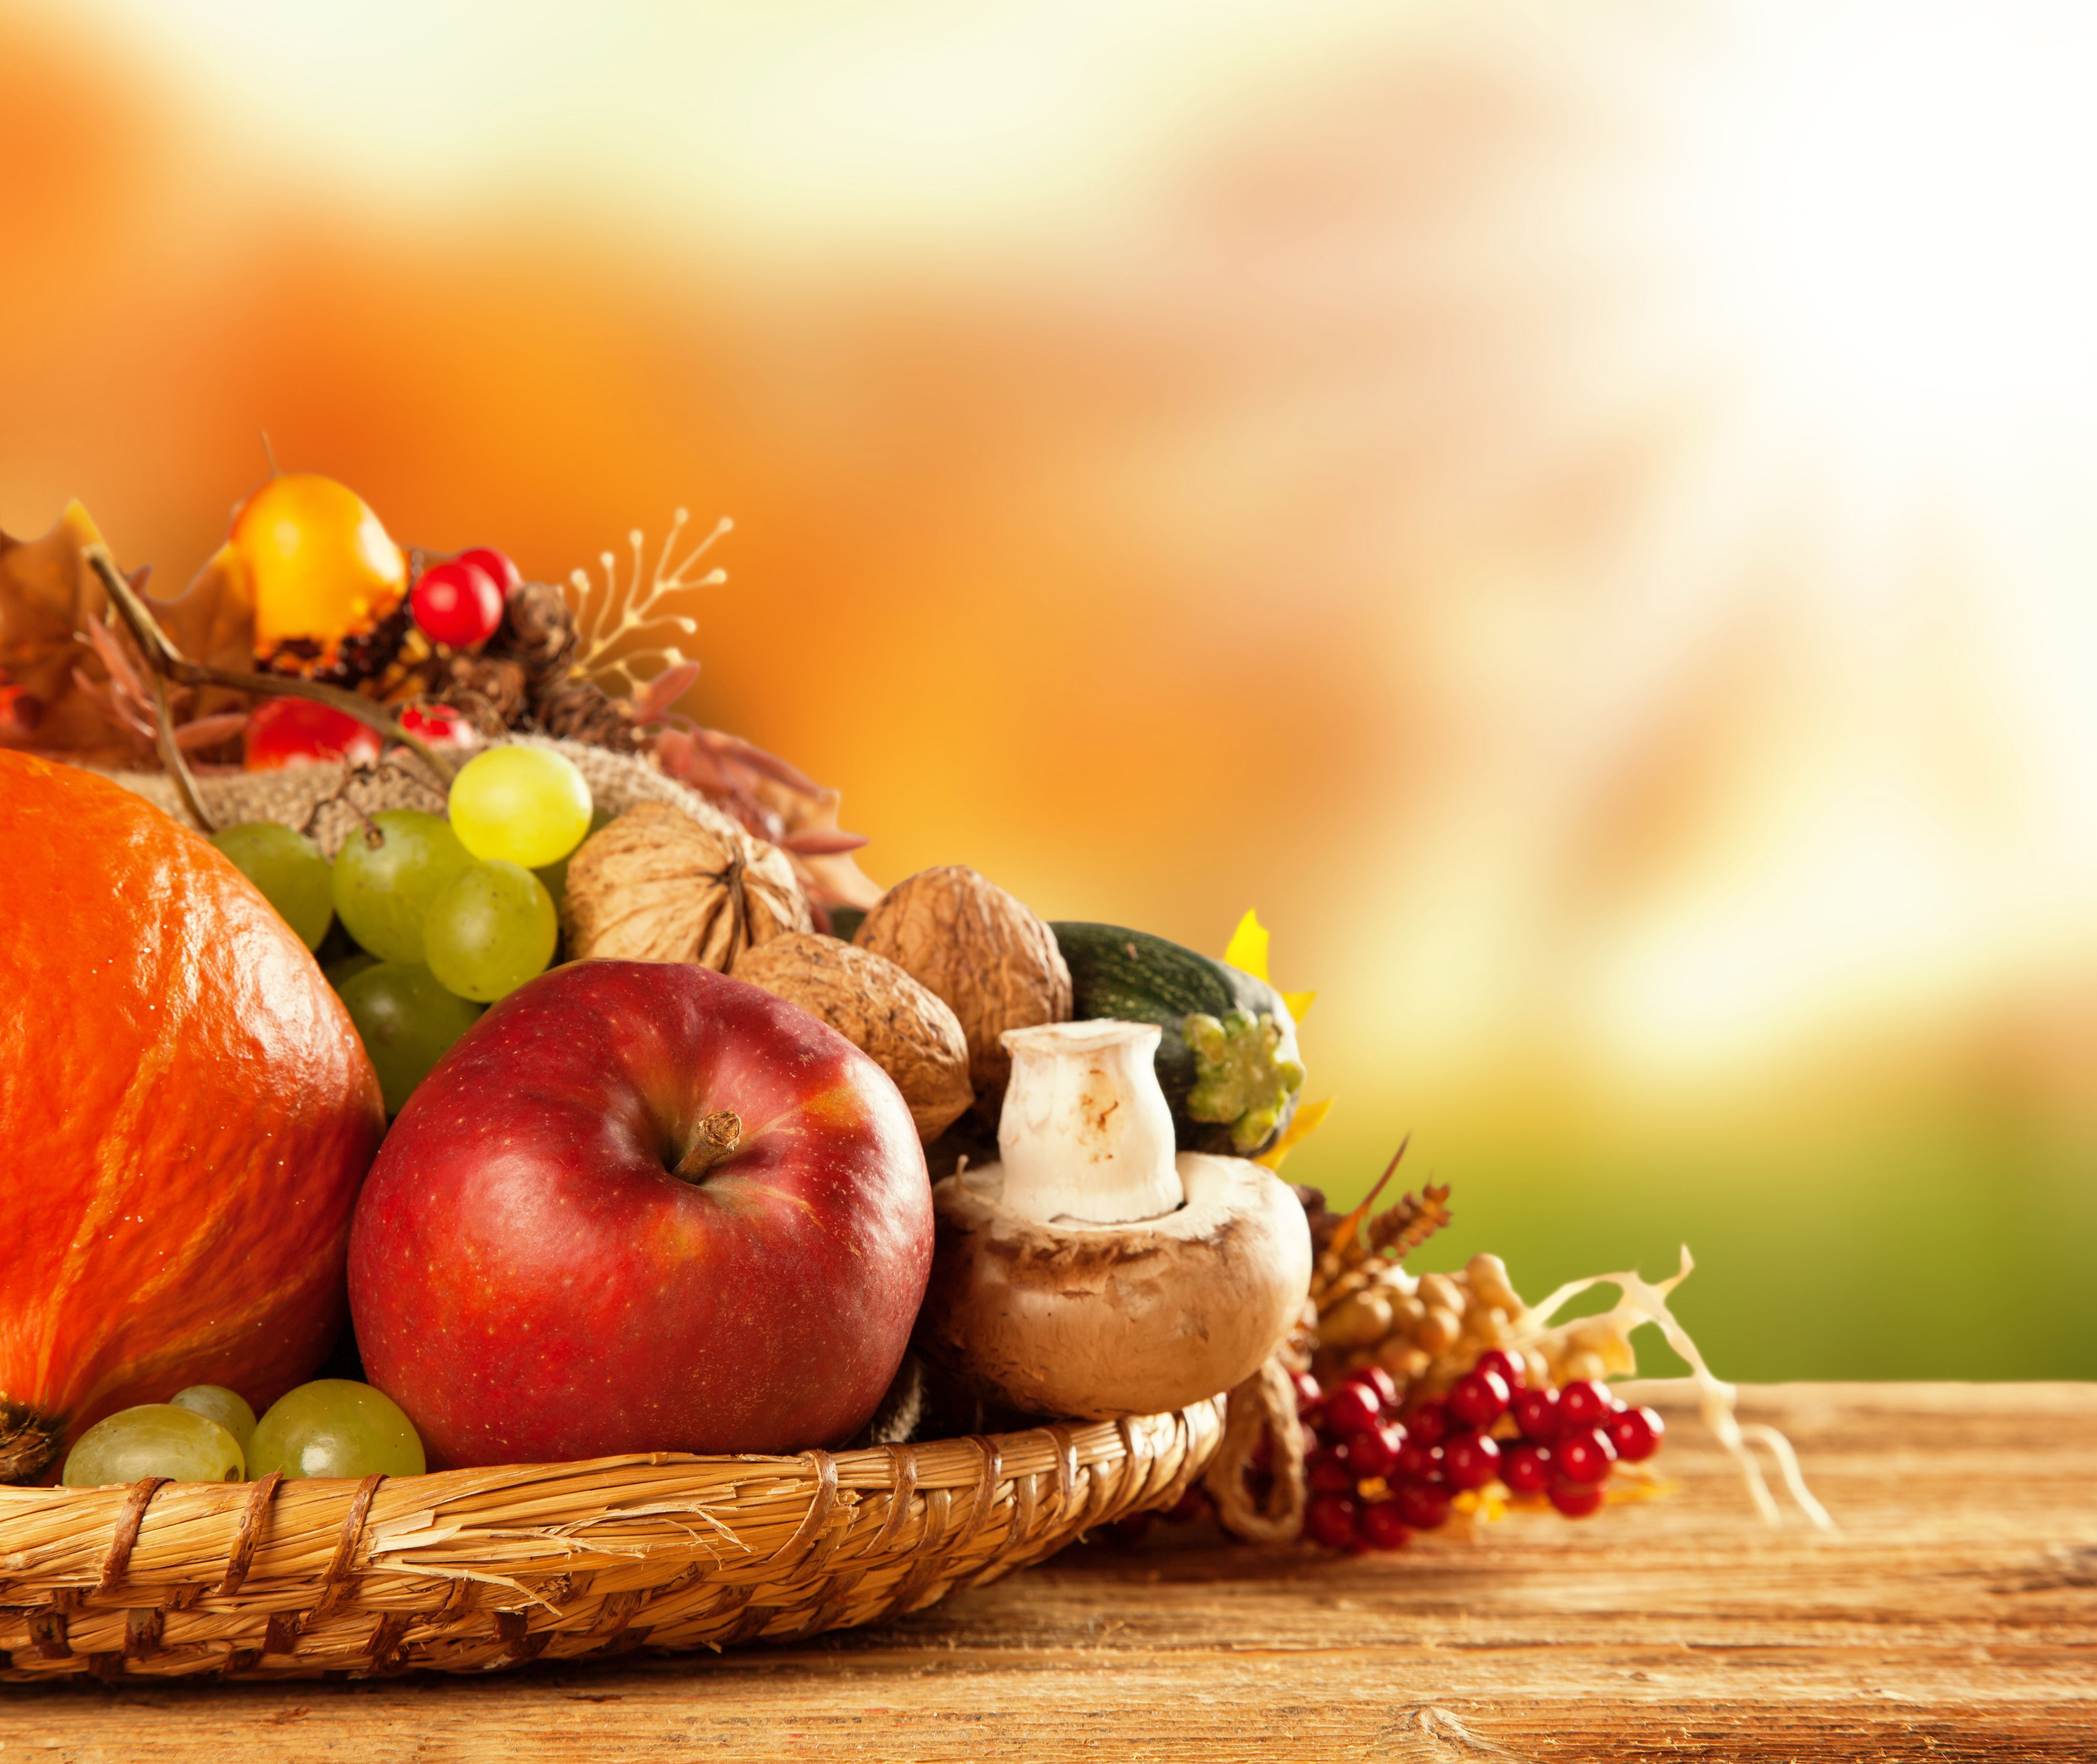 Autumn Fruits And Vegetables Background Quality Image And Transparent PNG Free Clipart